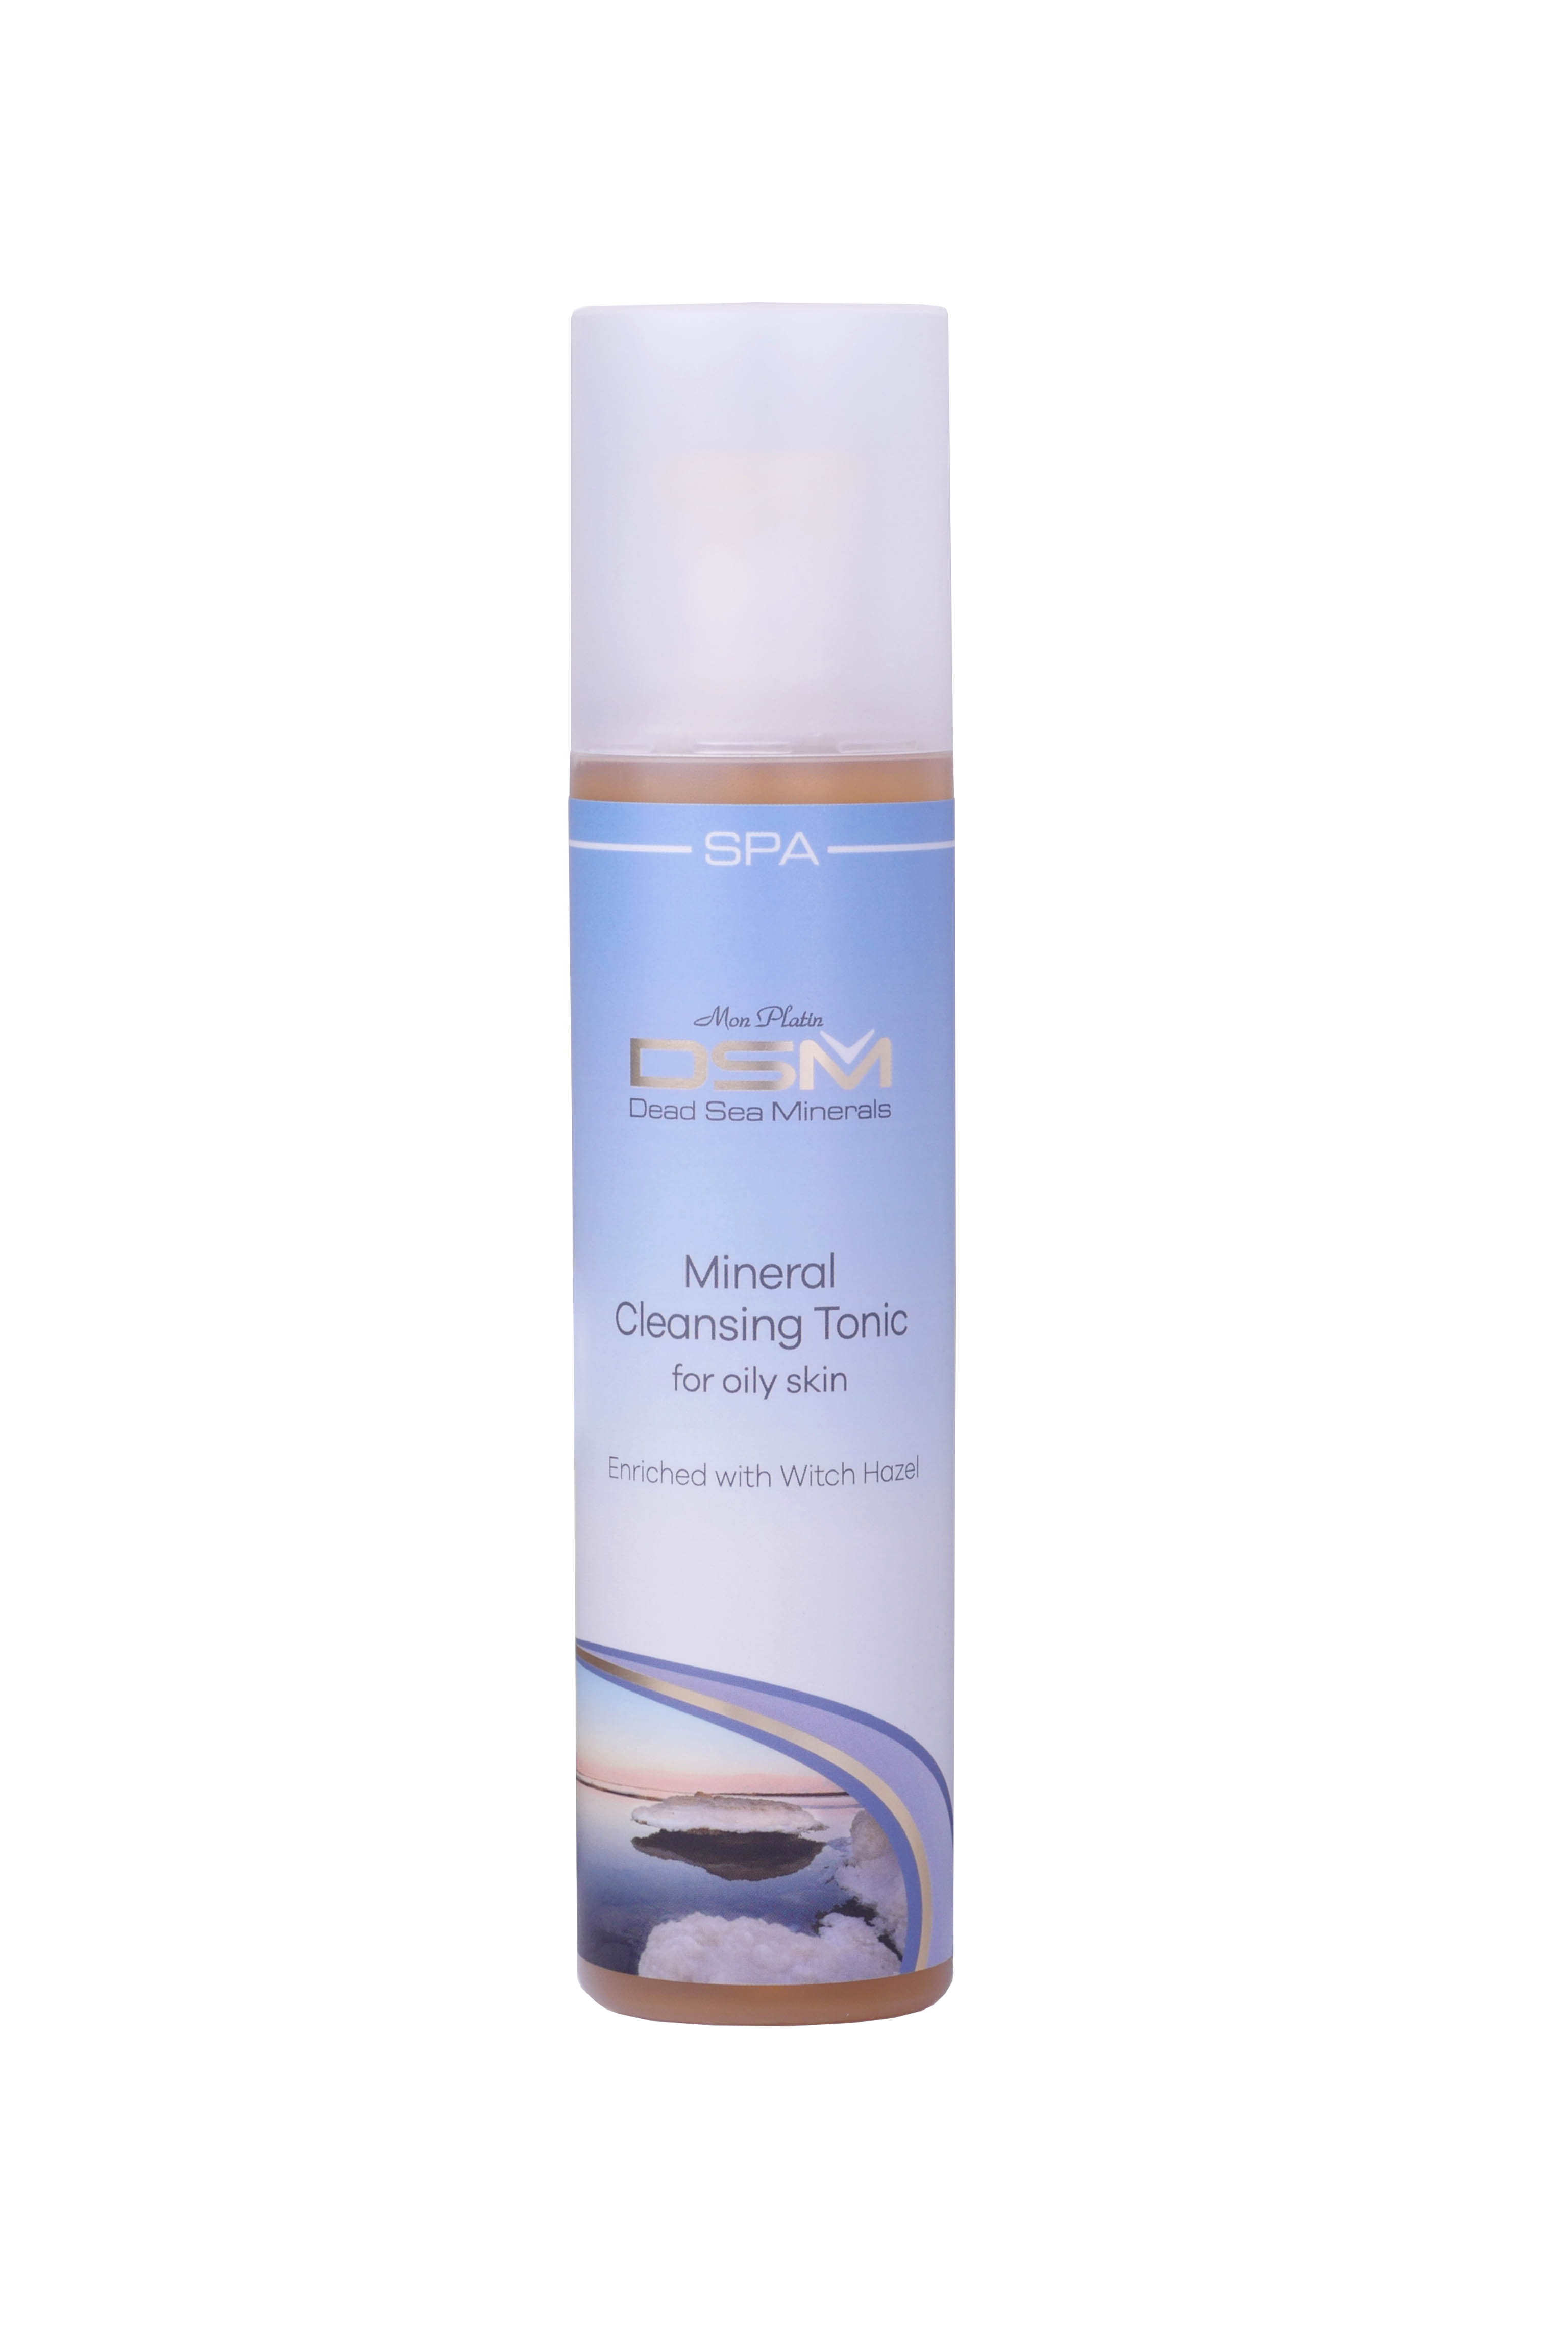 Mineral Cleansing Tonic for oily skin enriched with Chamomilla Recutita